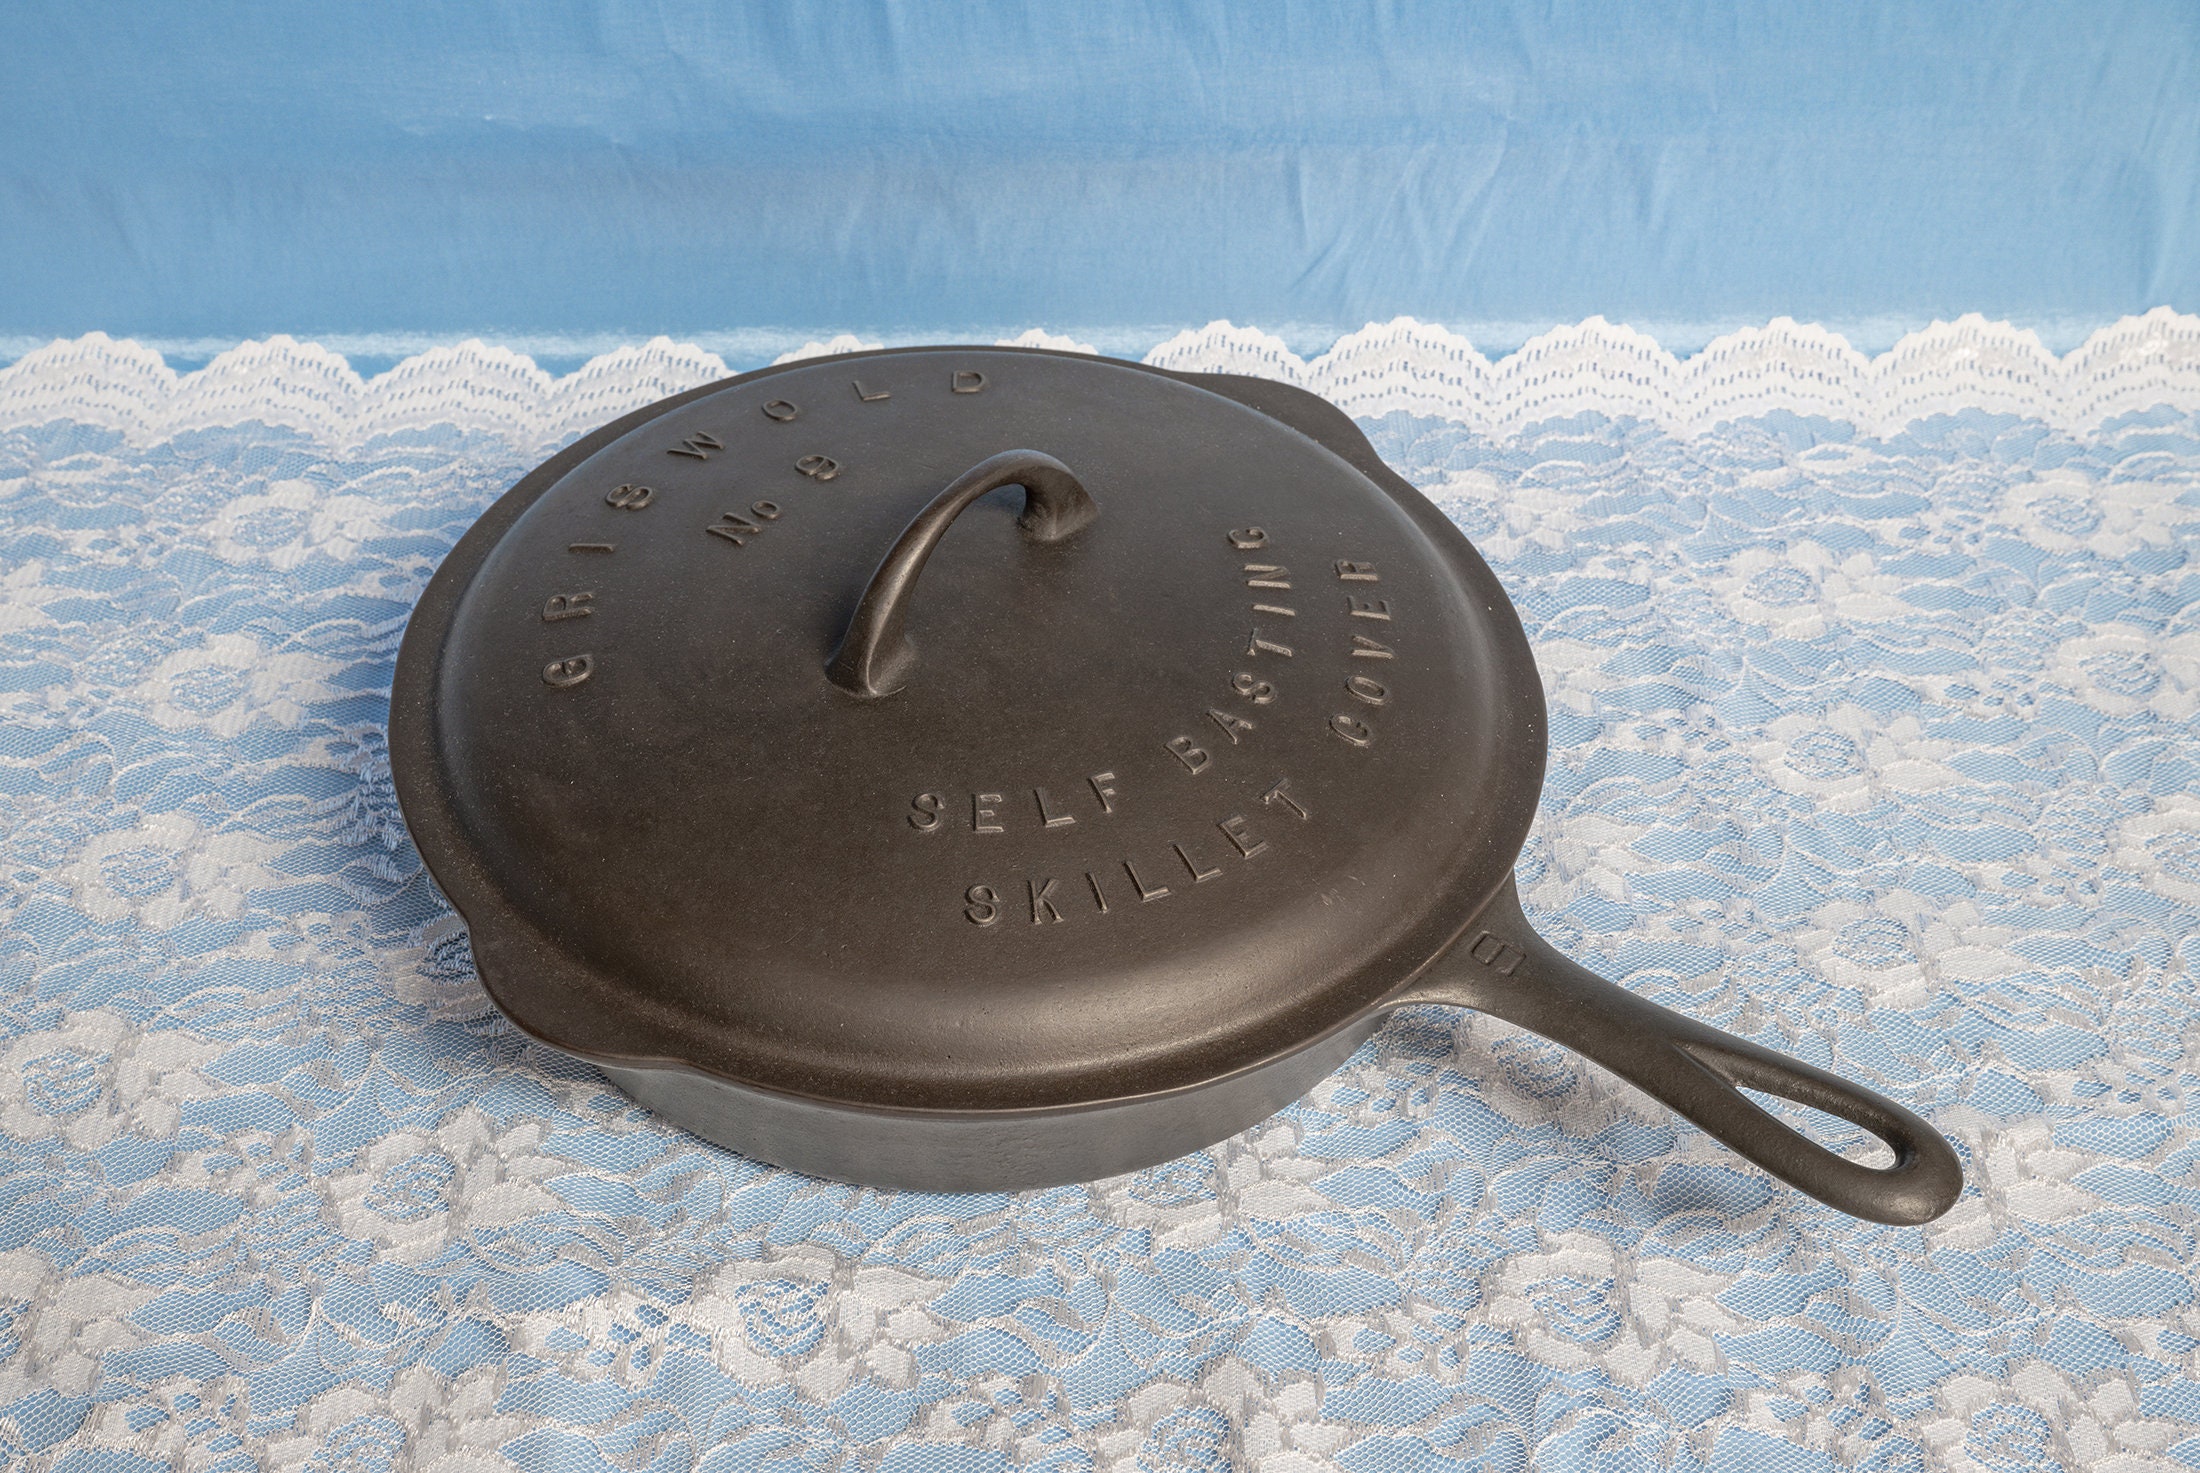 9 in Cast Iron Self-Basting Lid